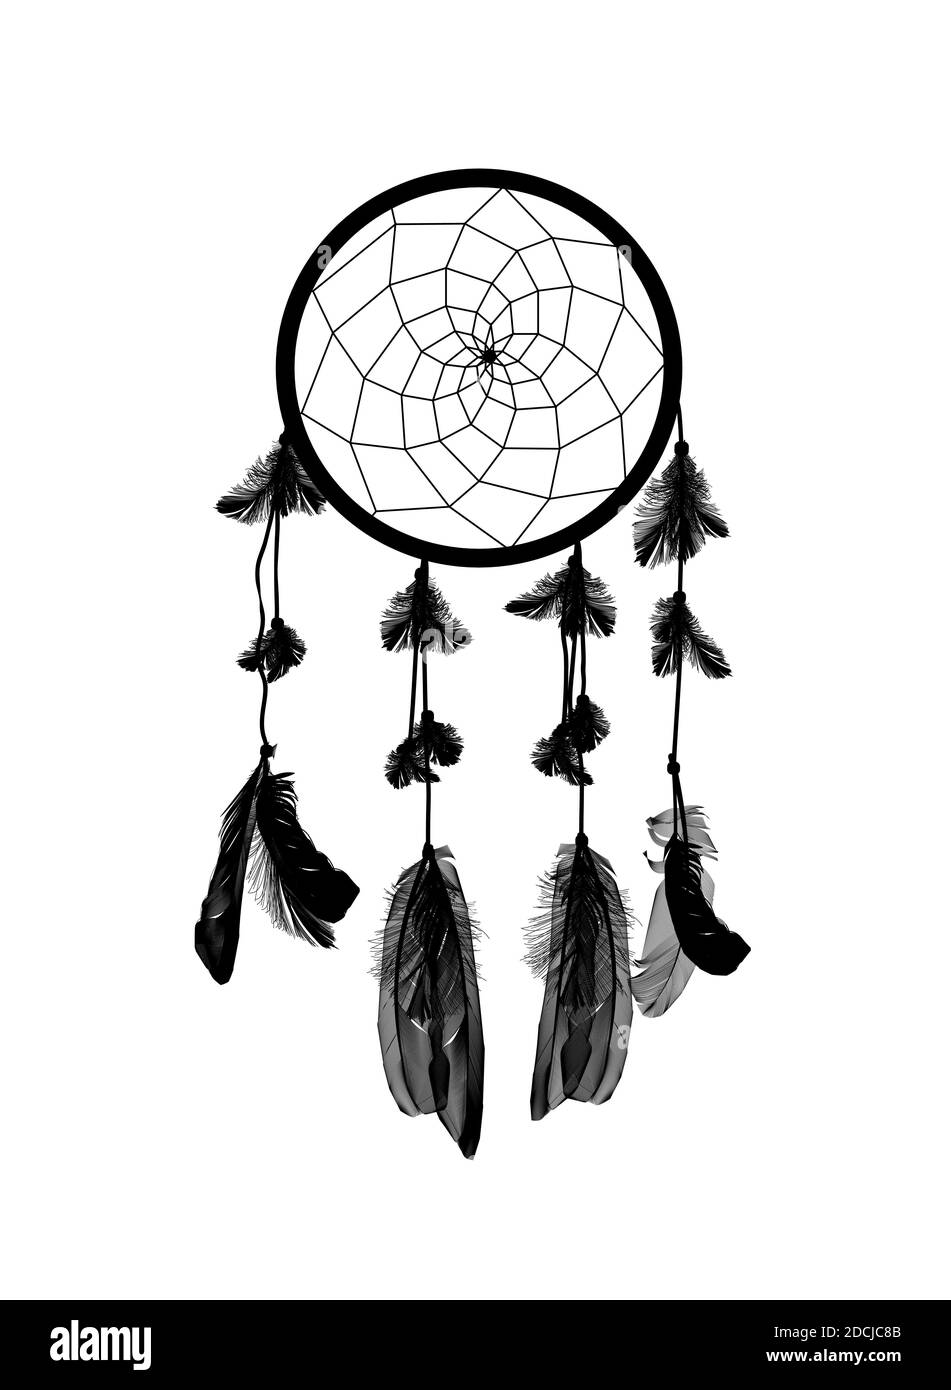 Naturalistic Black Dreamcatcher Isolated on White Background. Stock Photo